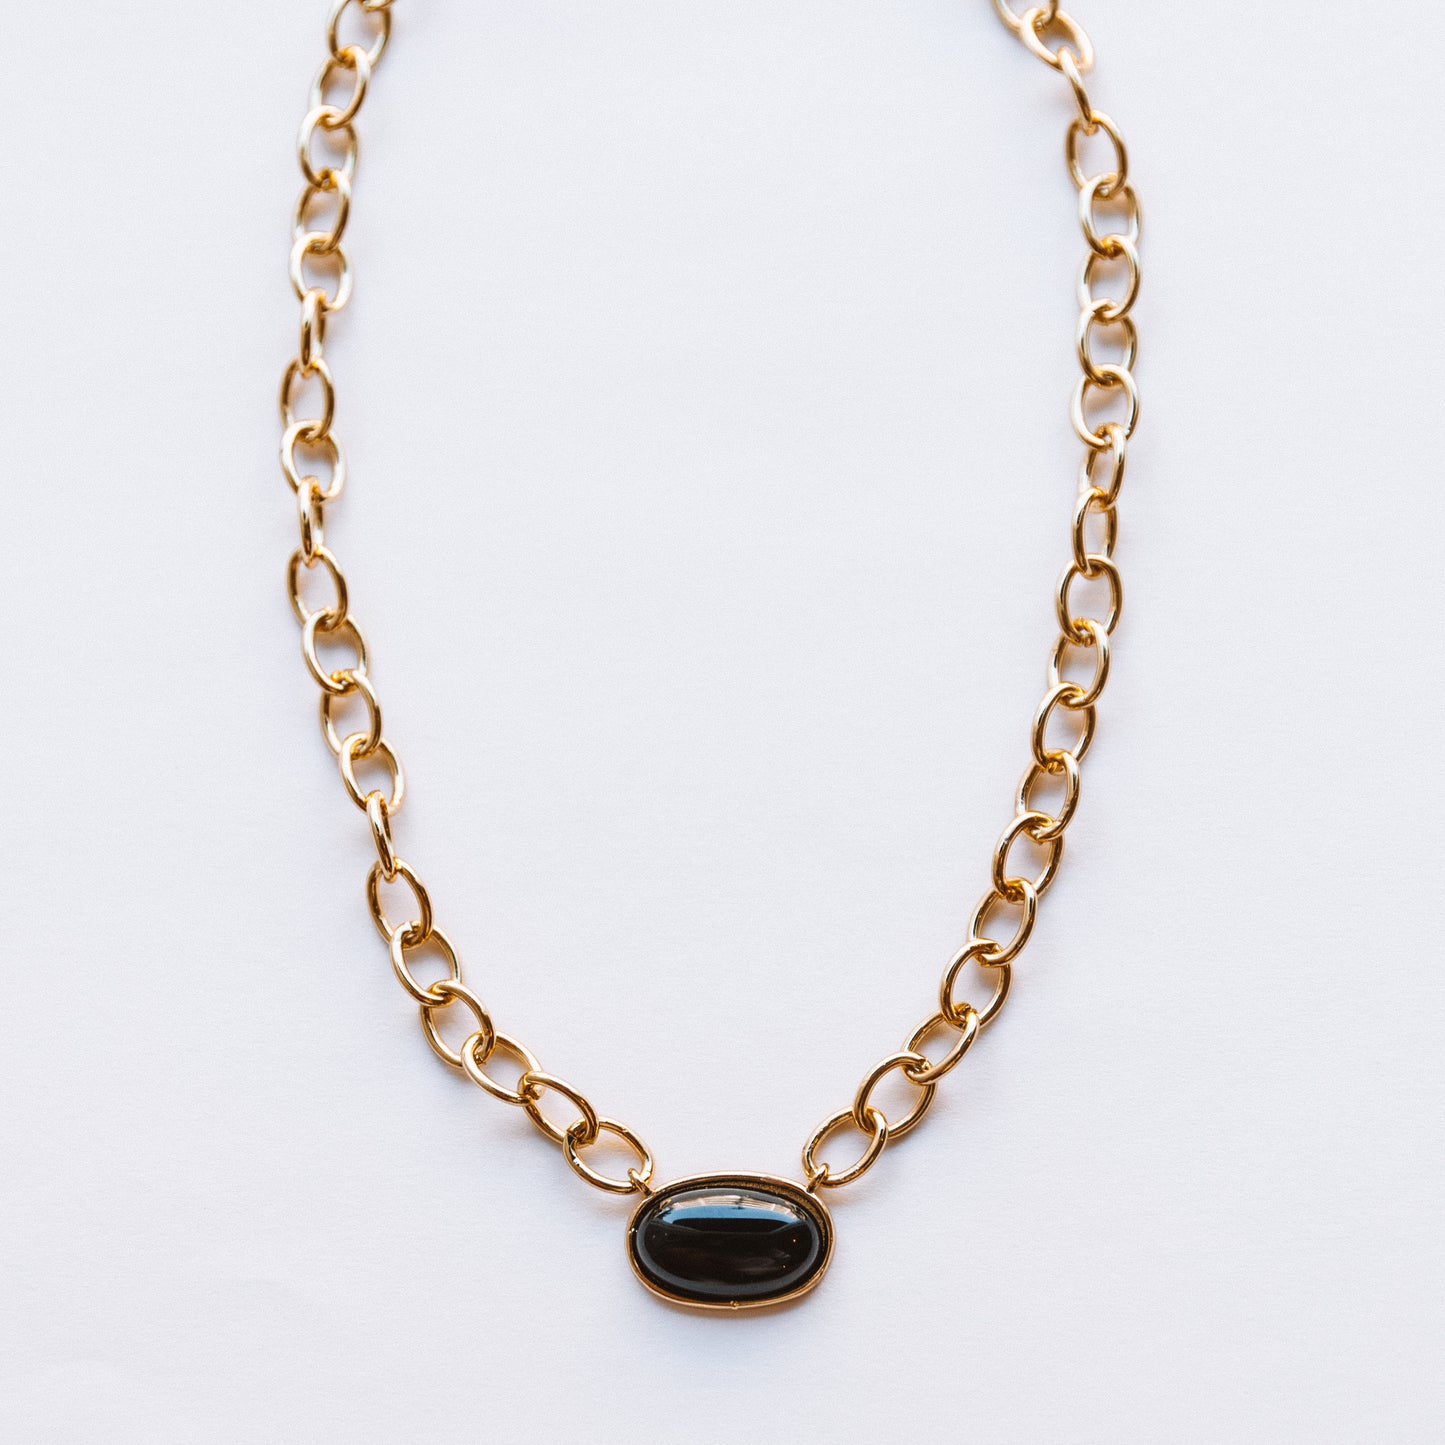 The Onyx Necklace